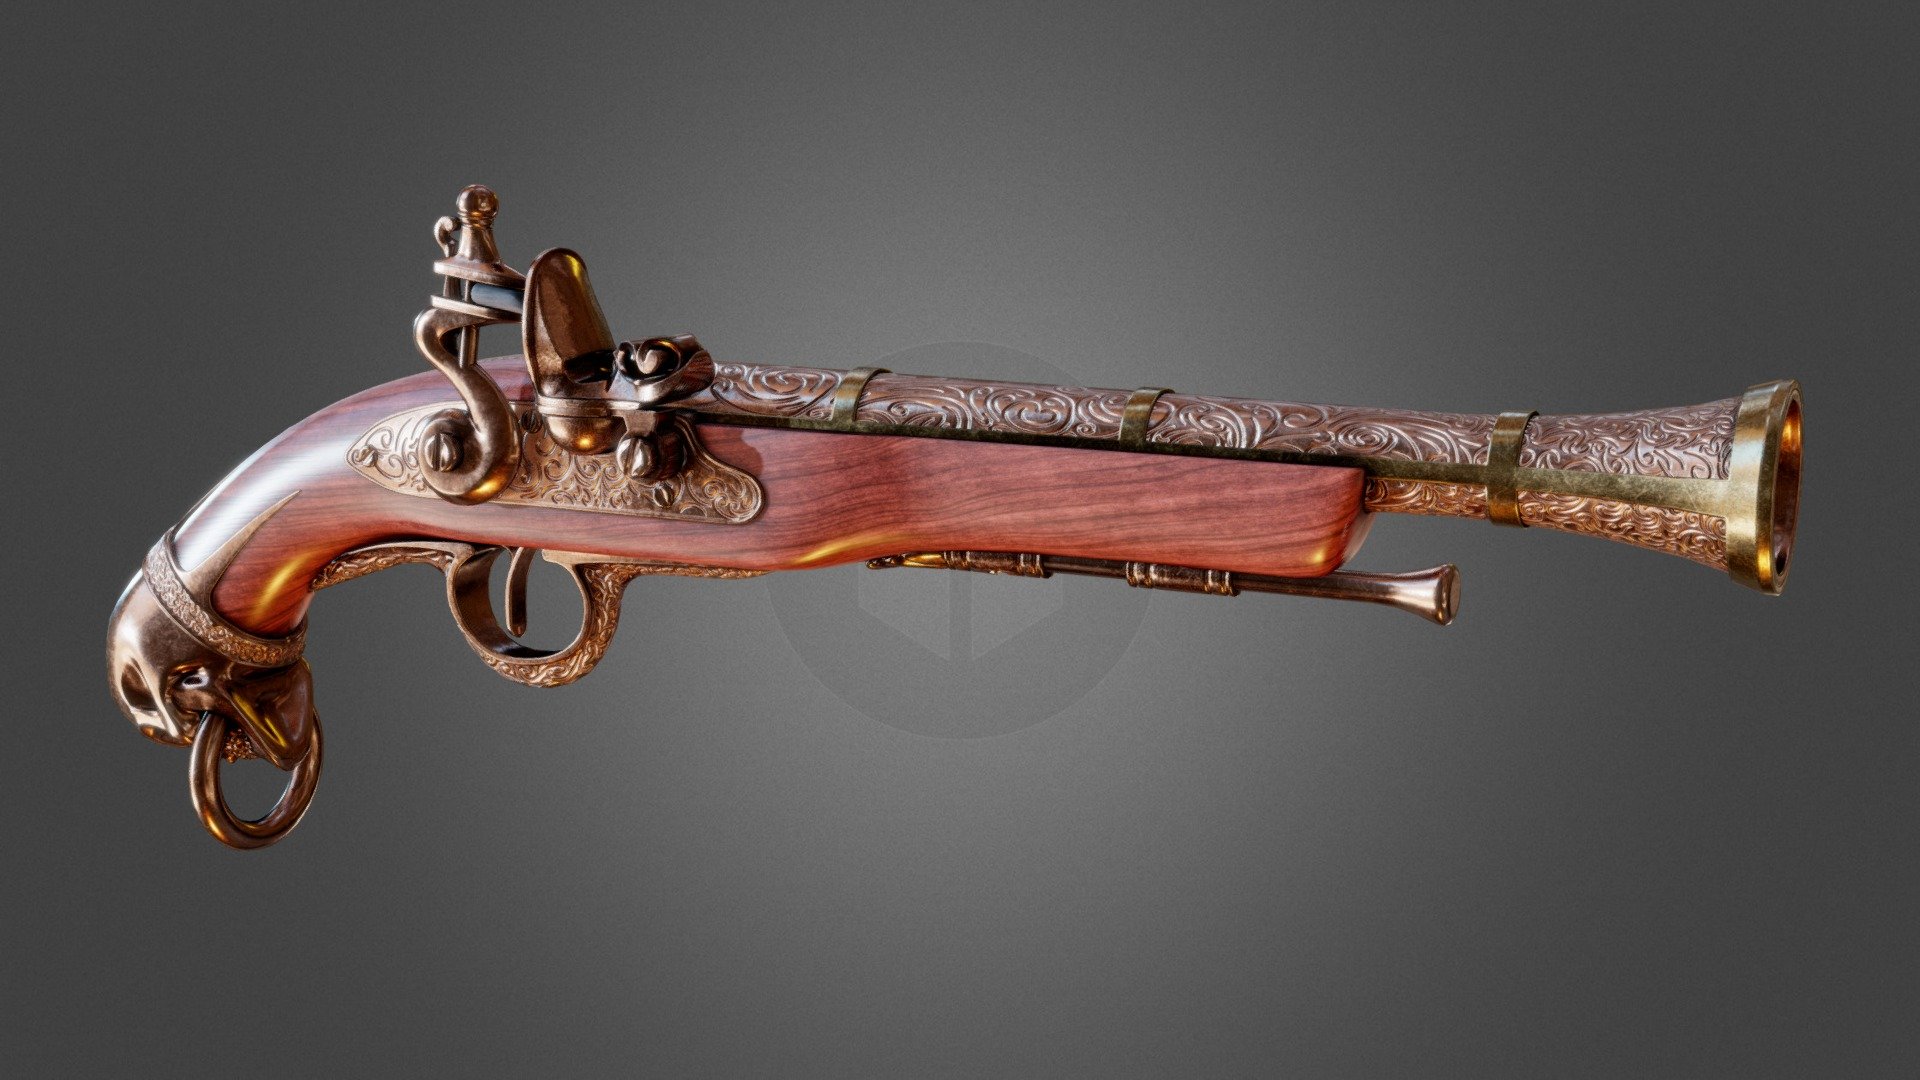 I wanted to take a stab at making something less boxy than my usual models with ornate features. I spent the last month on and off making this flintlock pistol. Modeled in Blender 2.83. Beveled normals and ornate engravings were baked in Blender, the ornate engravings were made in Affinity Designer. The rest of the texturing was done in Substance Painter. This is also the first time I sculpt a skull. I am super happy with how everything turned out!

Extra file includes:
PBR texture set in 1k, 2k, and 4k.
Each set Contains: Color Map, Metalic Map, Normal Map, and Roughness Map.

Also in the Extra file is the final Blend file with a basic light setup and a free HDRI I used from HDRI Haven packed in 3d model